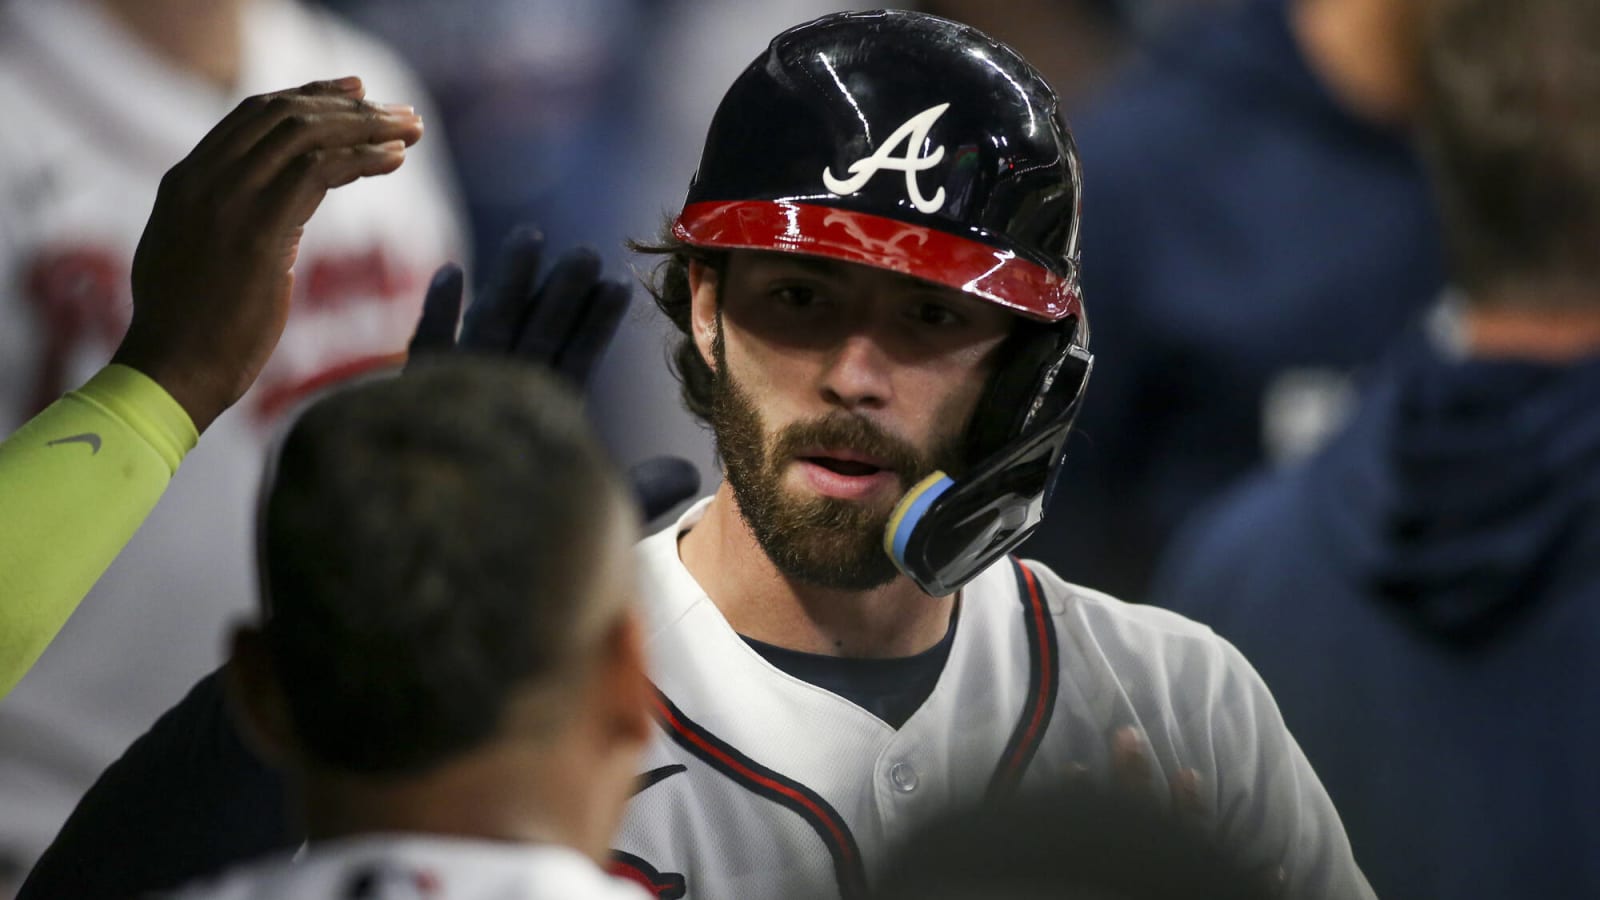 ESPN analysts predict Braves will re-sign Dansby Swanson